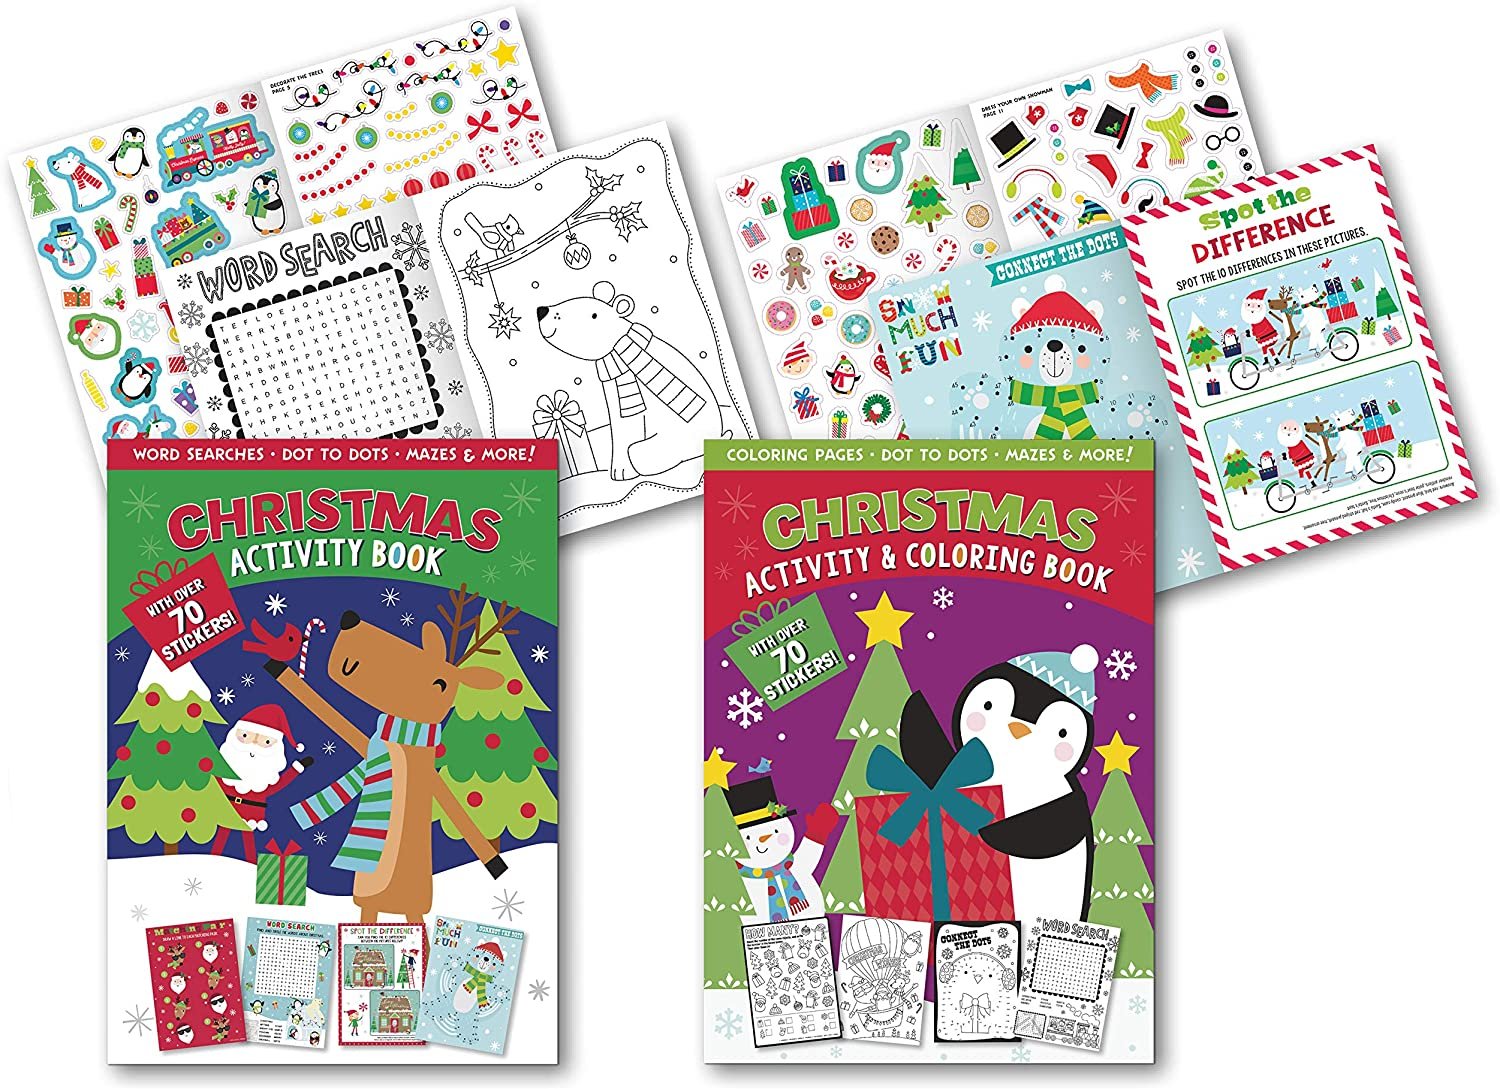 B-THERE Christmas Super Sticker Activity Book Set of 2 Xmas Activity ...